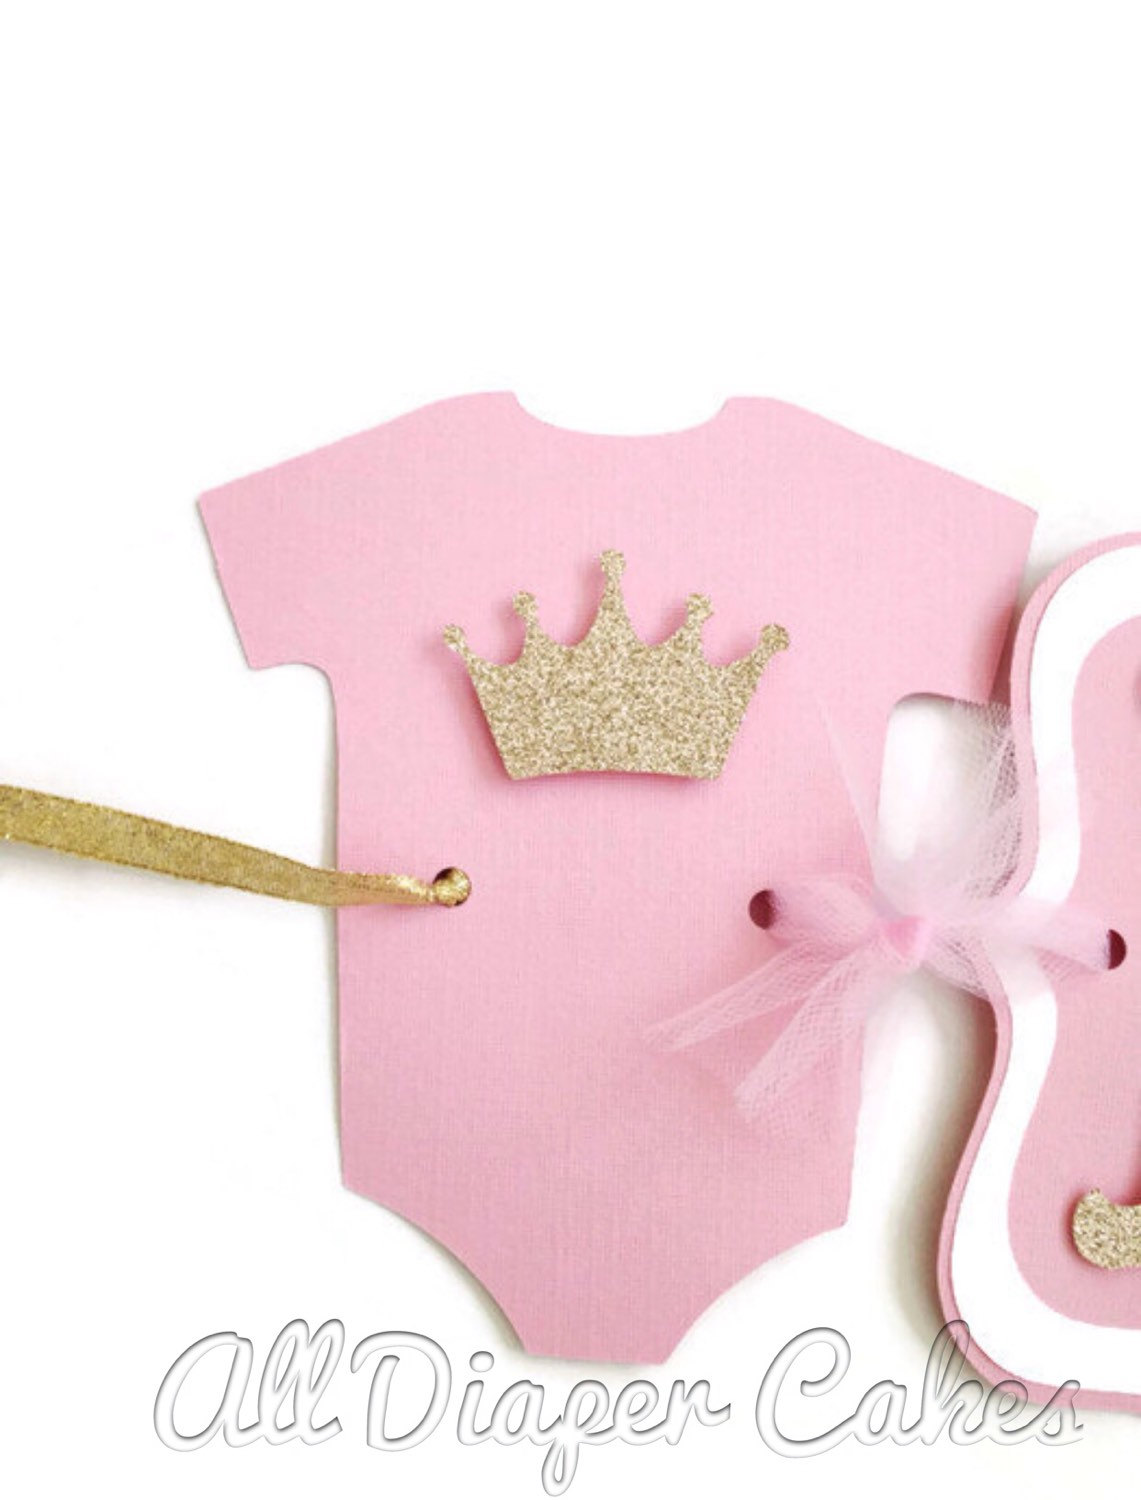 Full Size of Baby Shower:89+ Indulging Baby Shower Banner Picture Inspirations Baby Shower Banner Princess Baby Shower Banner Pink And Gold Banner